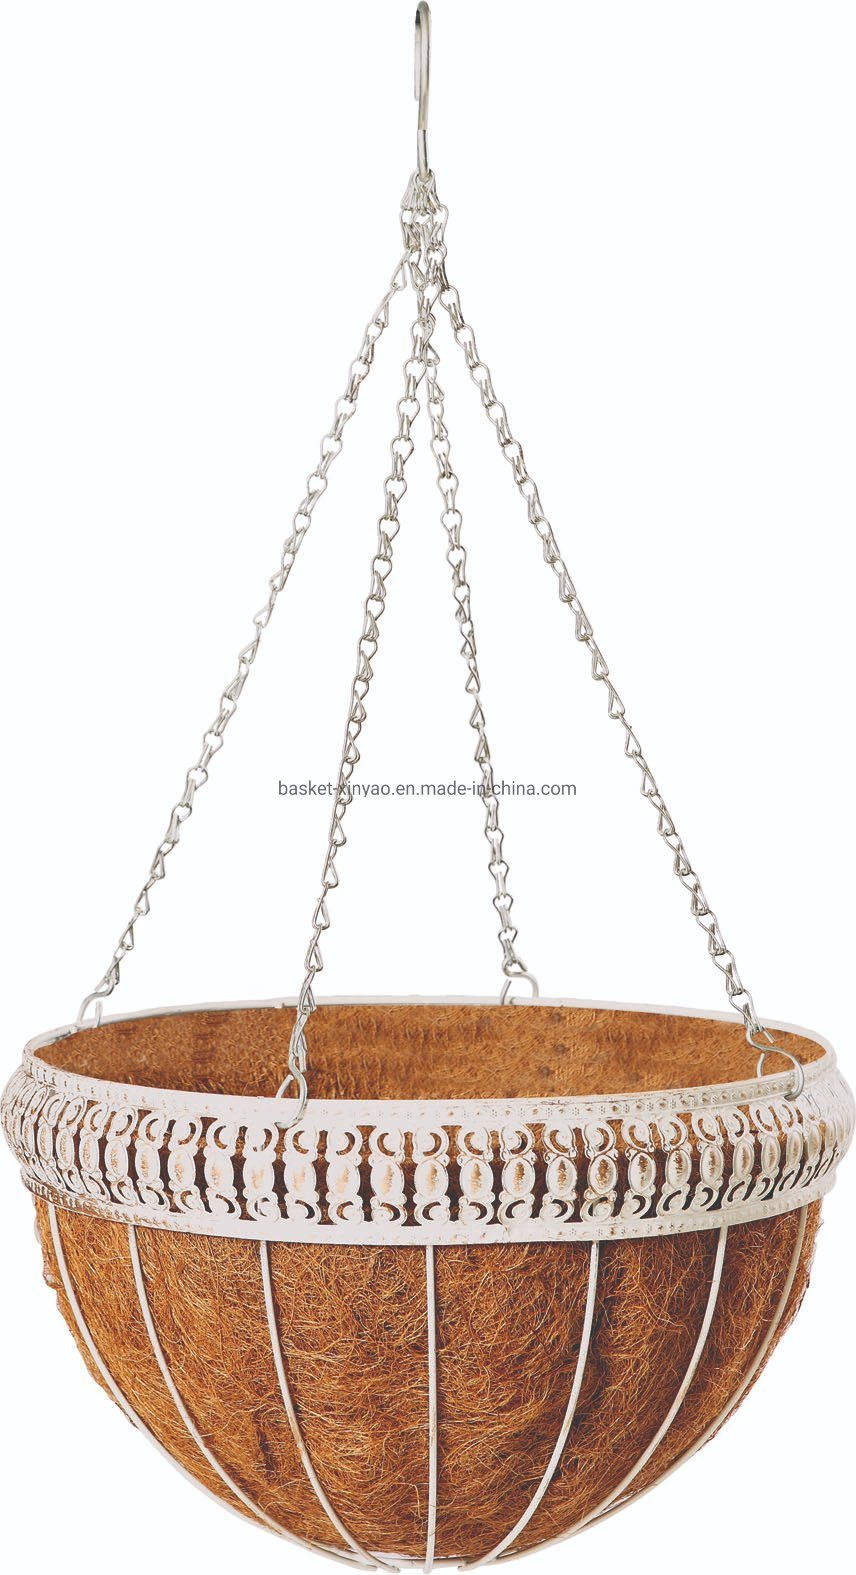 Hanging Flower Basket with Coco Liner and Chain Hanging Planters Baskets (XY15053)